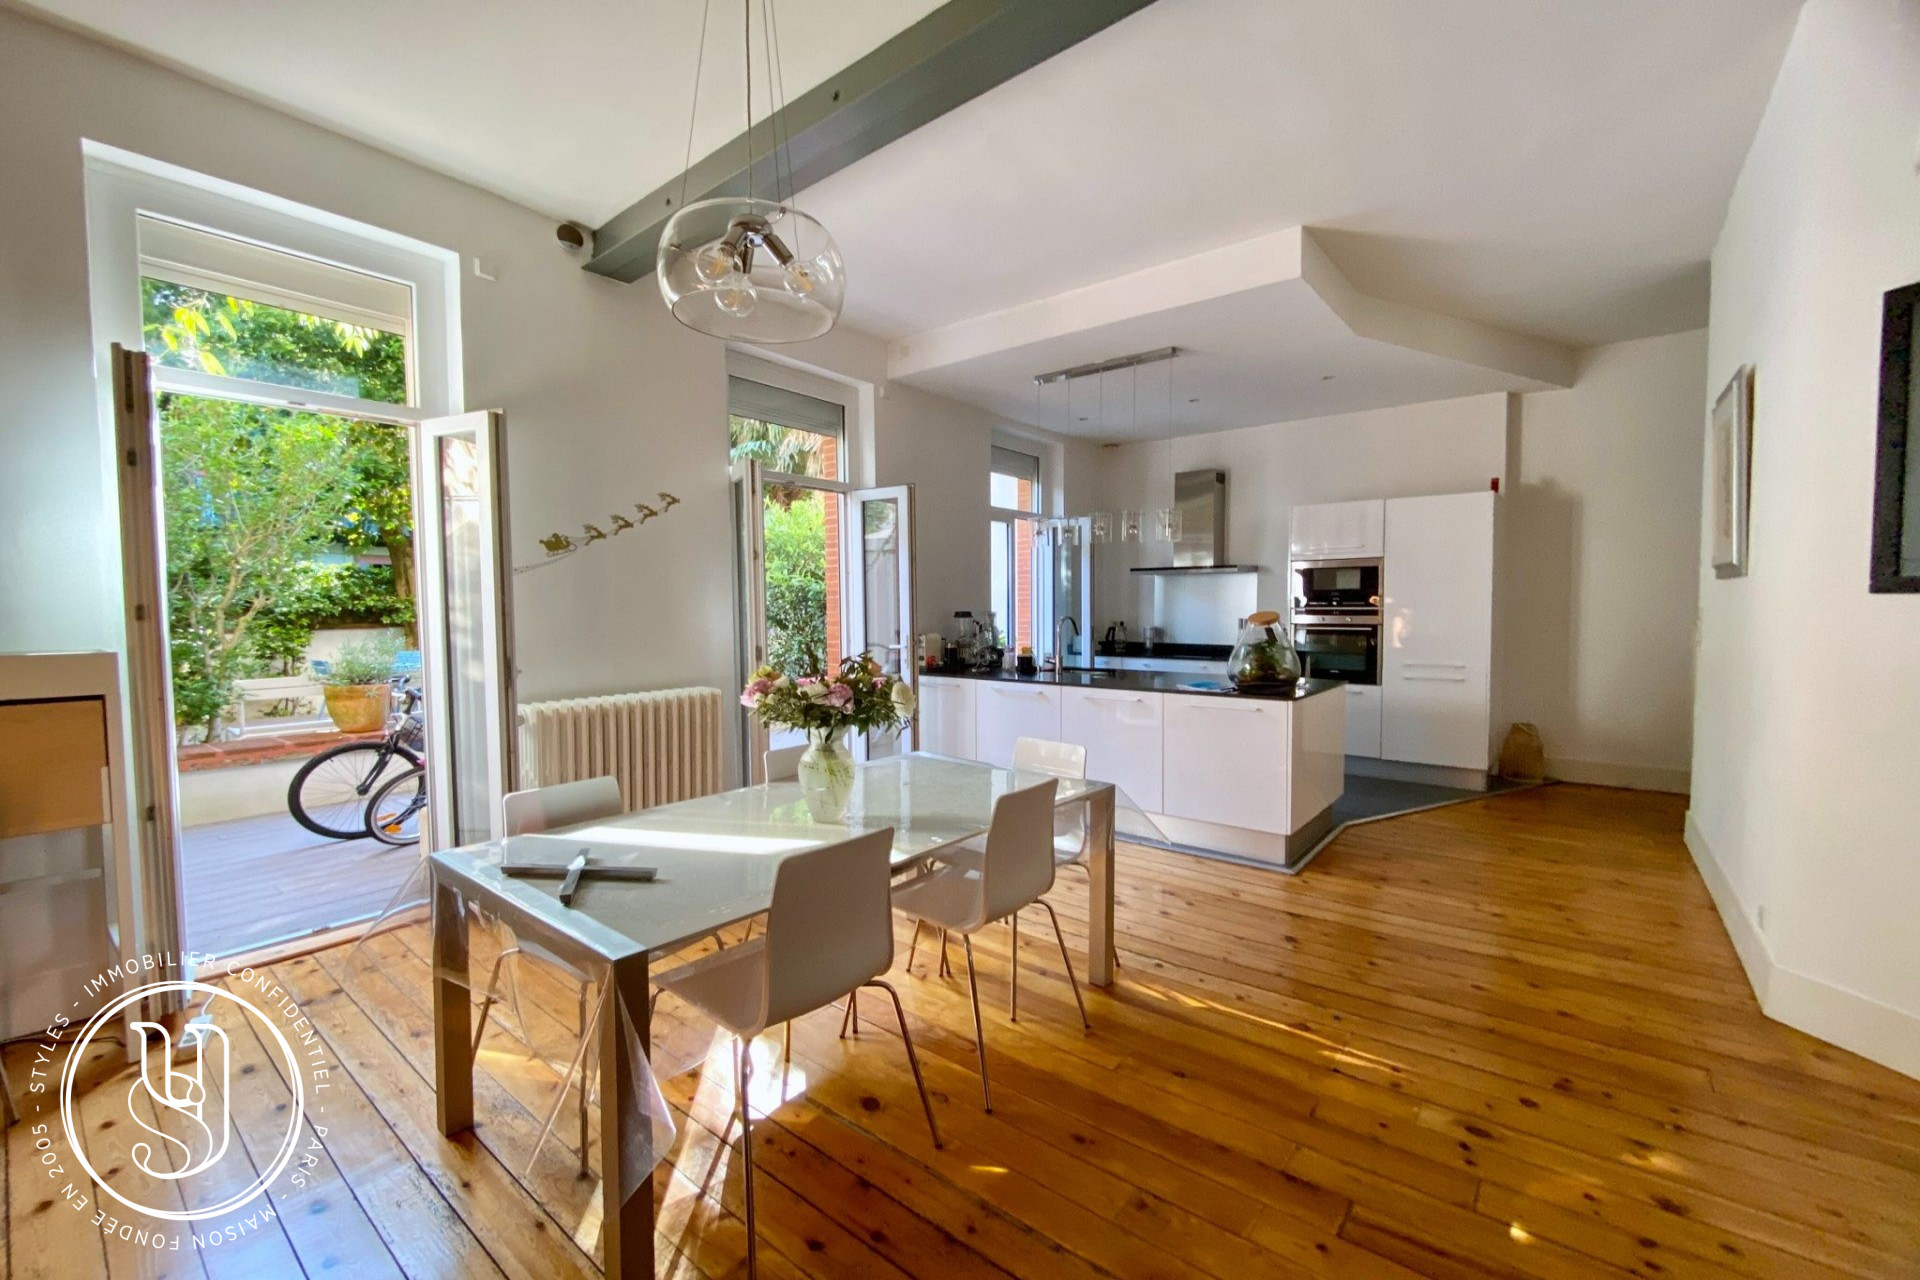 Toulouse - Chalets - under offer, A superb family townhouse with garden   - image 2